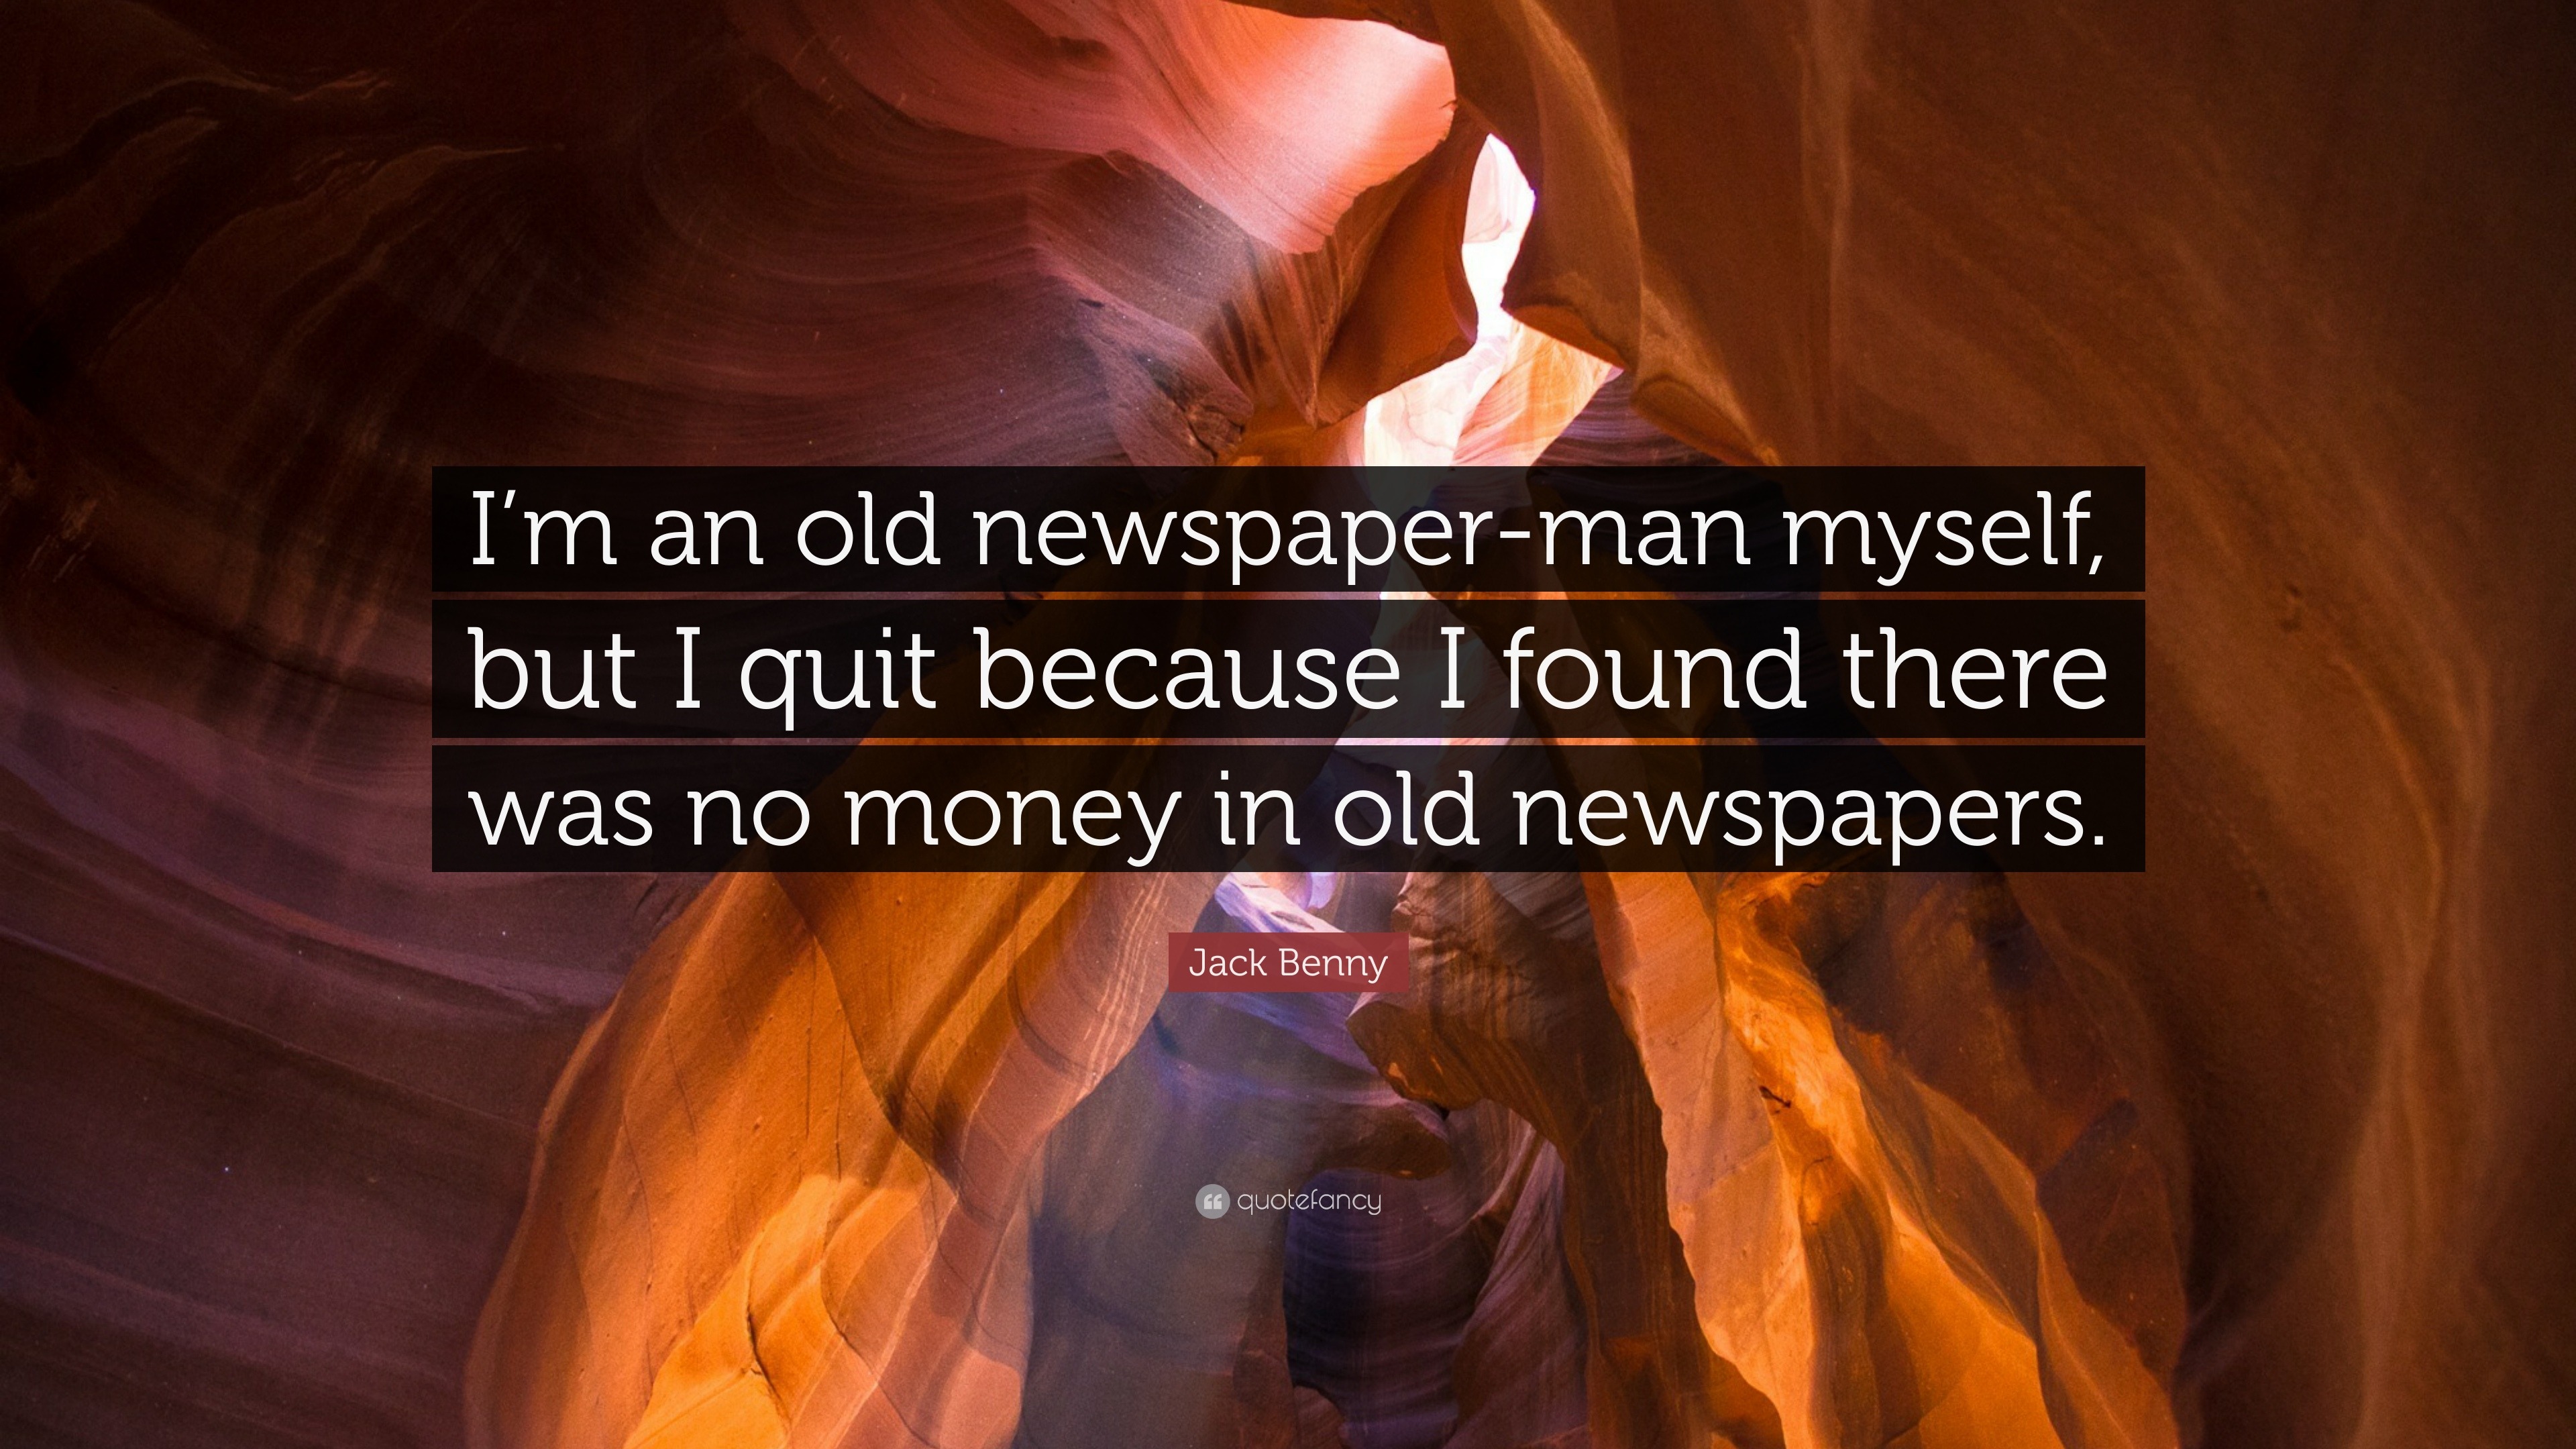 Jack Benny Quote: “I'm An Old Newspaper-Man Myself, But I Quit Because I Found